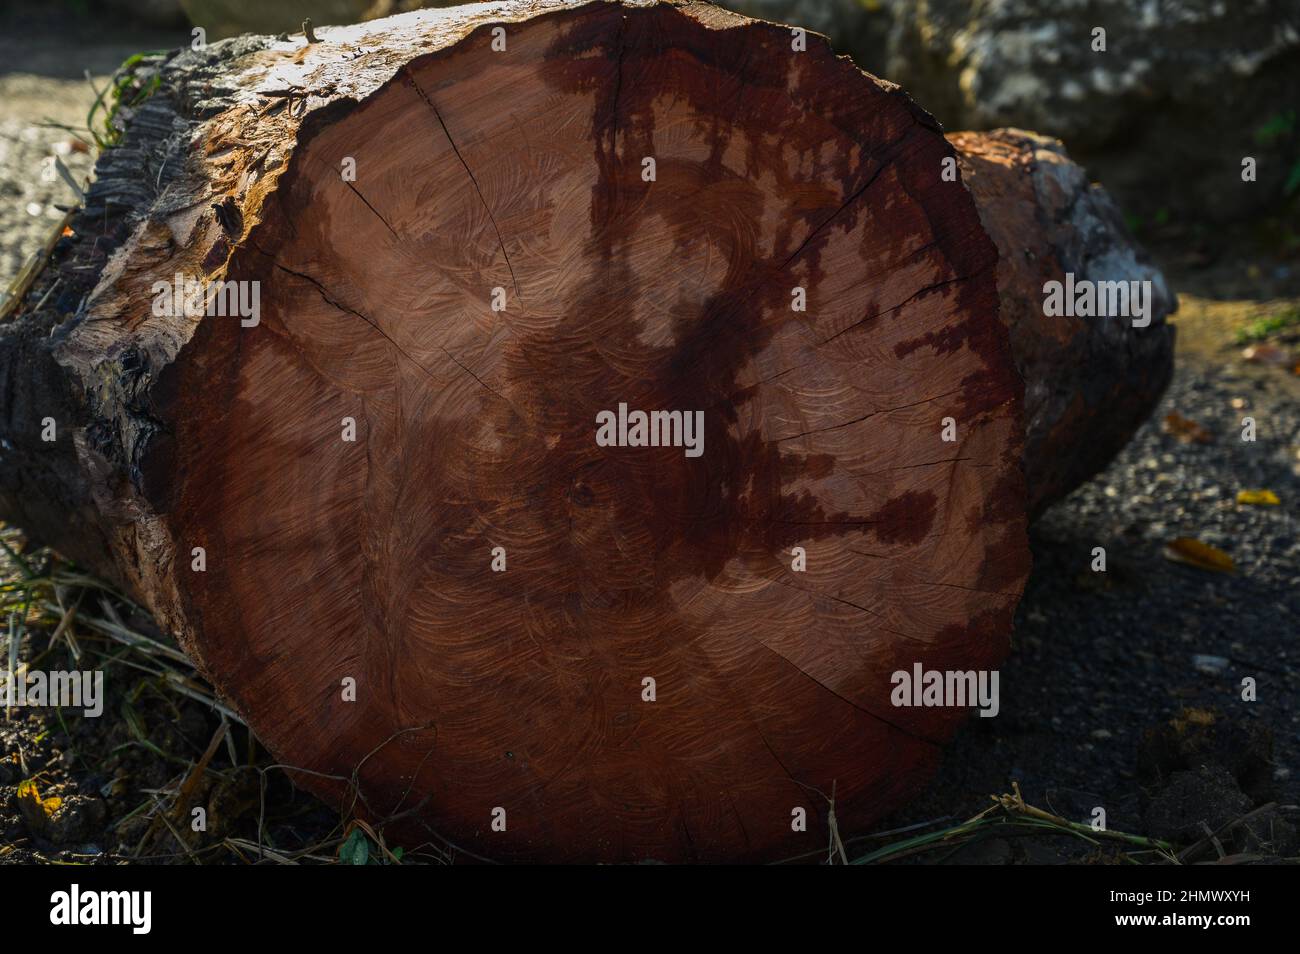 The photo of a wooden sawed-off red tree was taken in the Dominican Republic in the early morning. The mahogany cross cut vividly reflects the texture Stock Photo